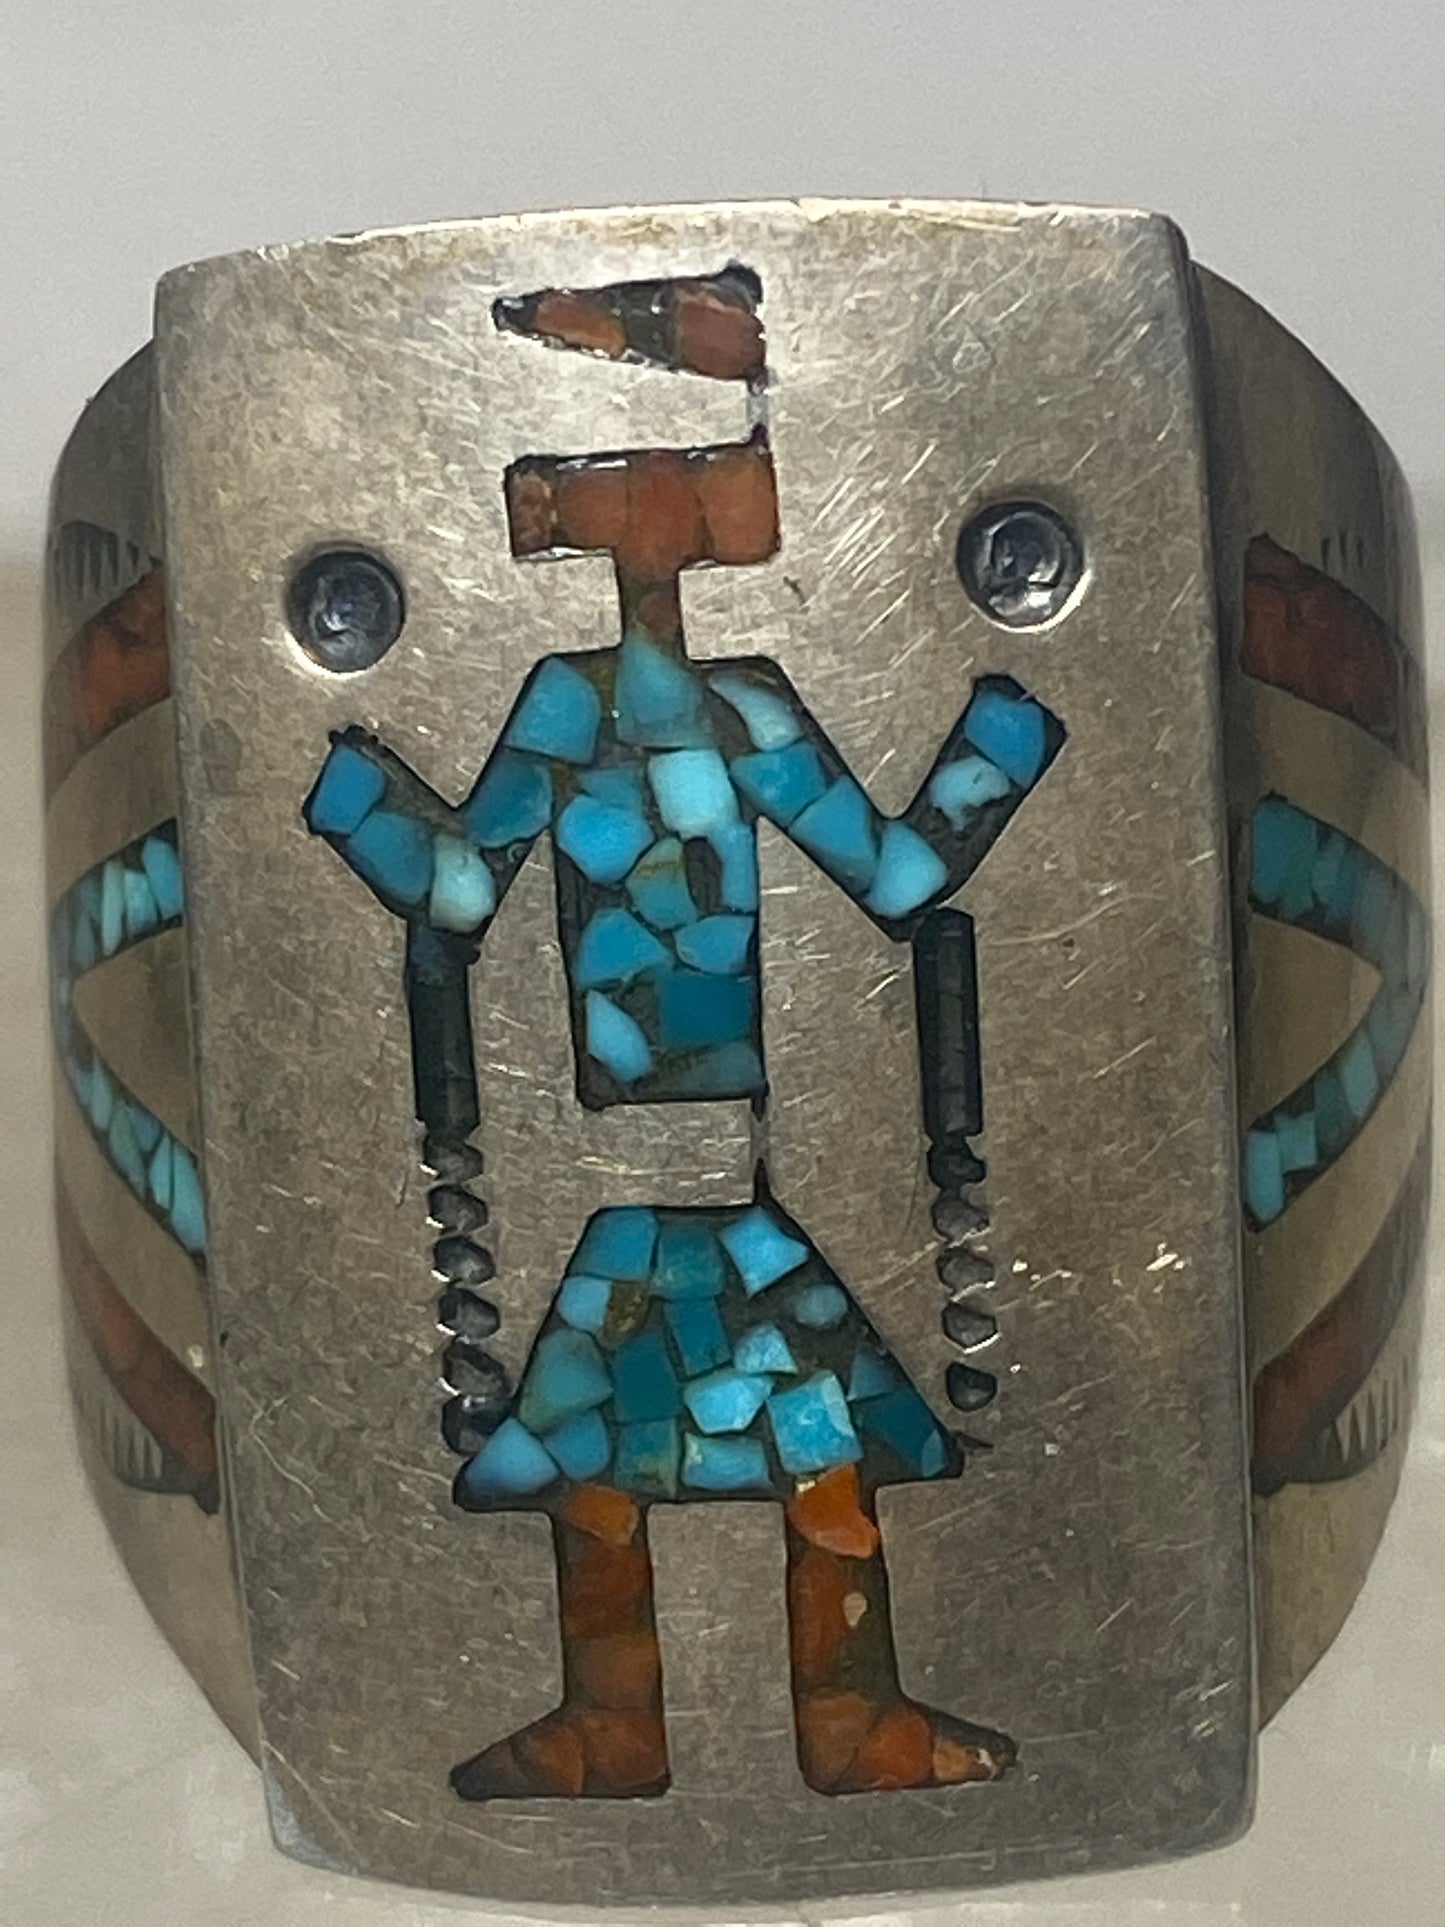 Kokopelli  ring size 11.75 Navajo turquoise coral chips southwest sterling silver women men